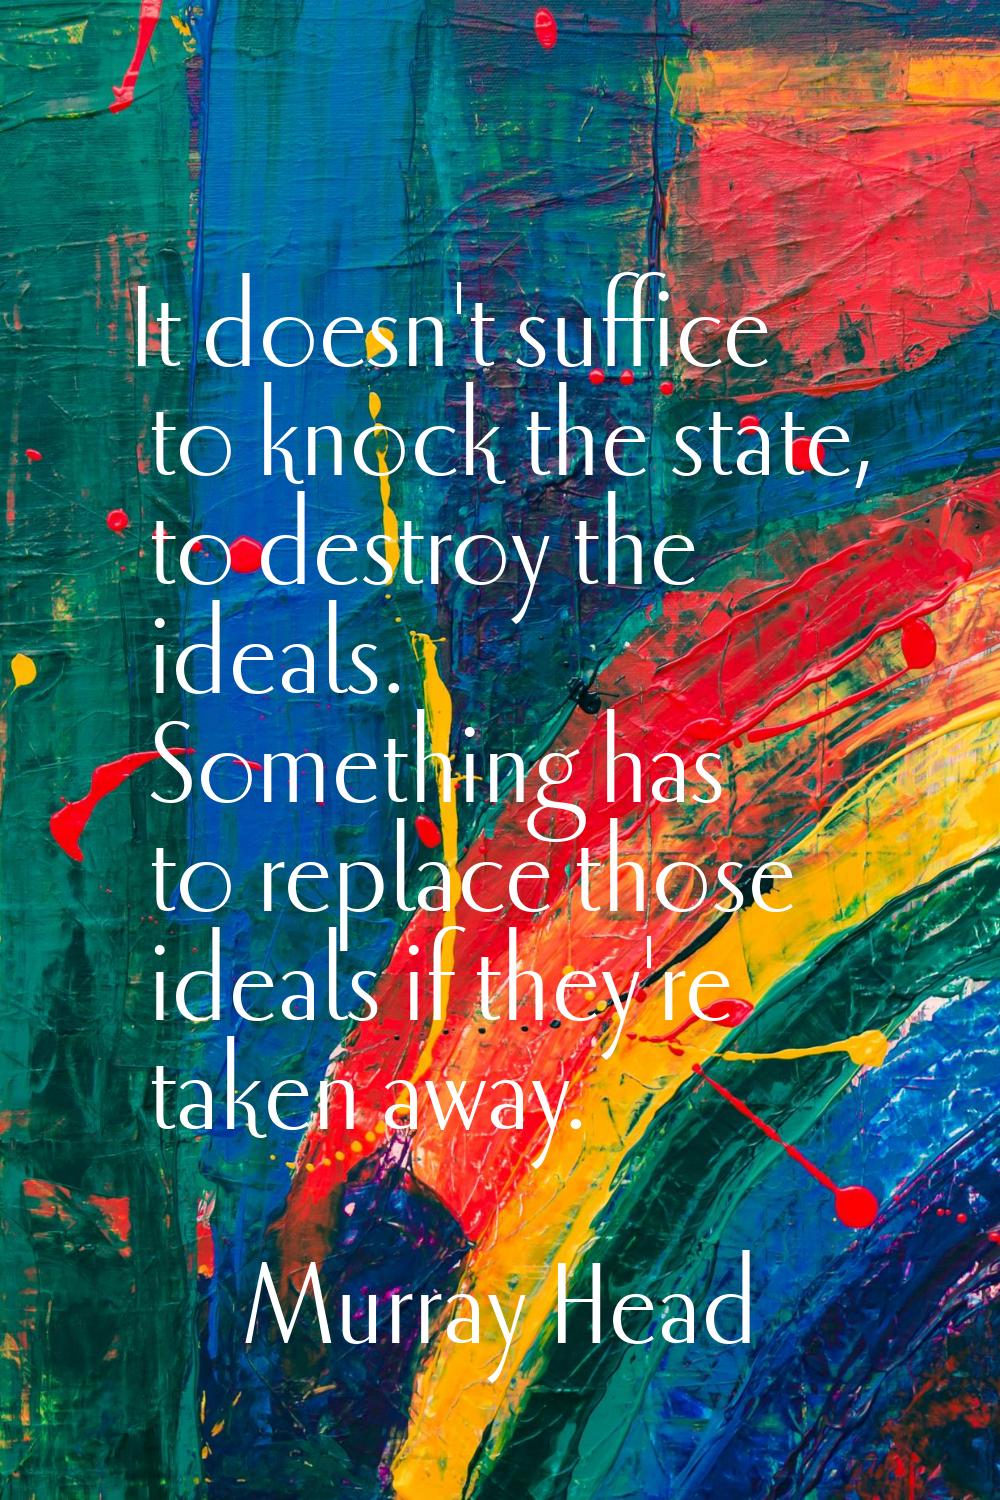 It doesn't suffice to knock the state, to destroy the ideals. Something has to replace those ideals